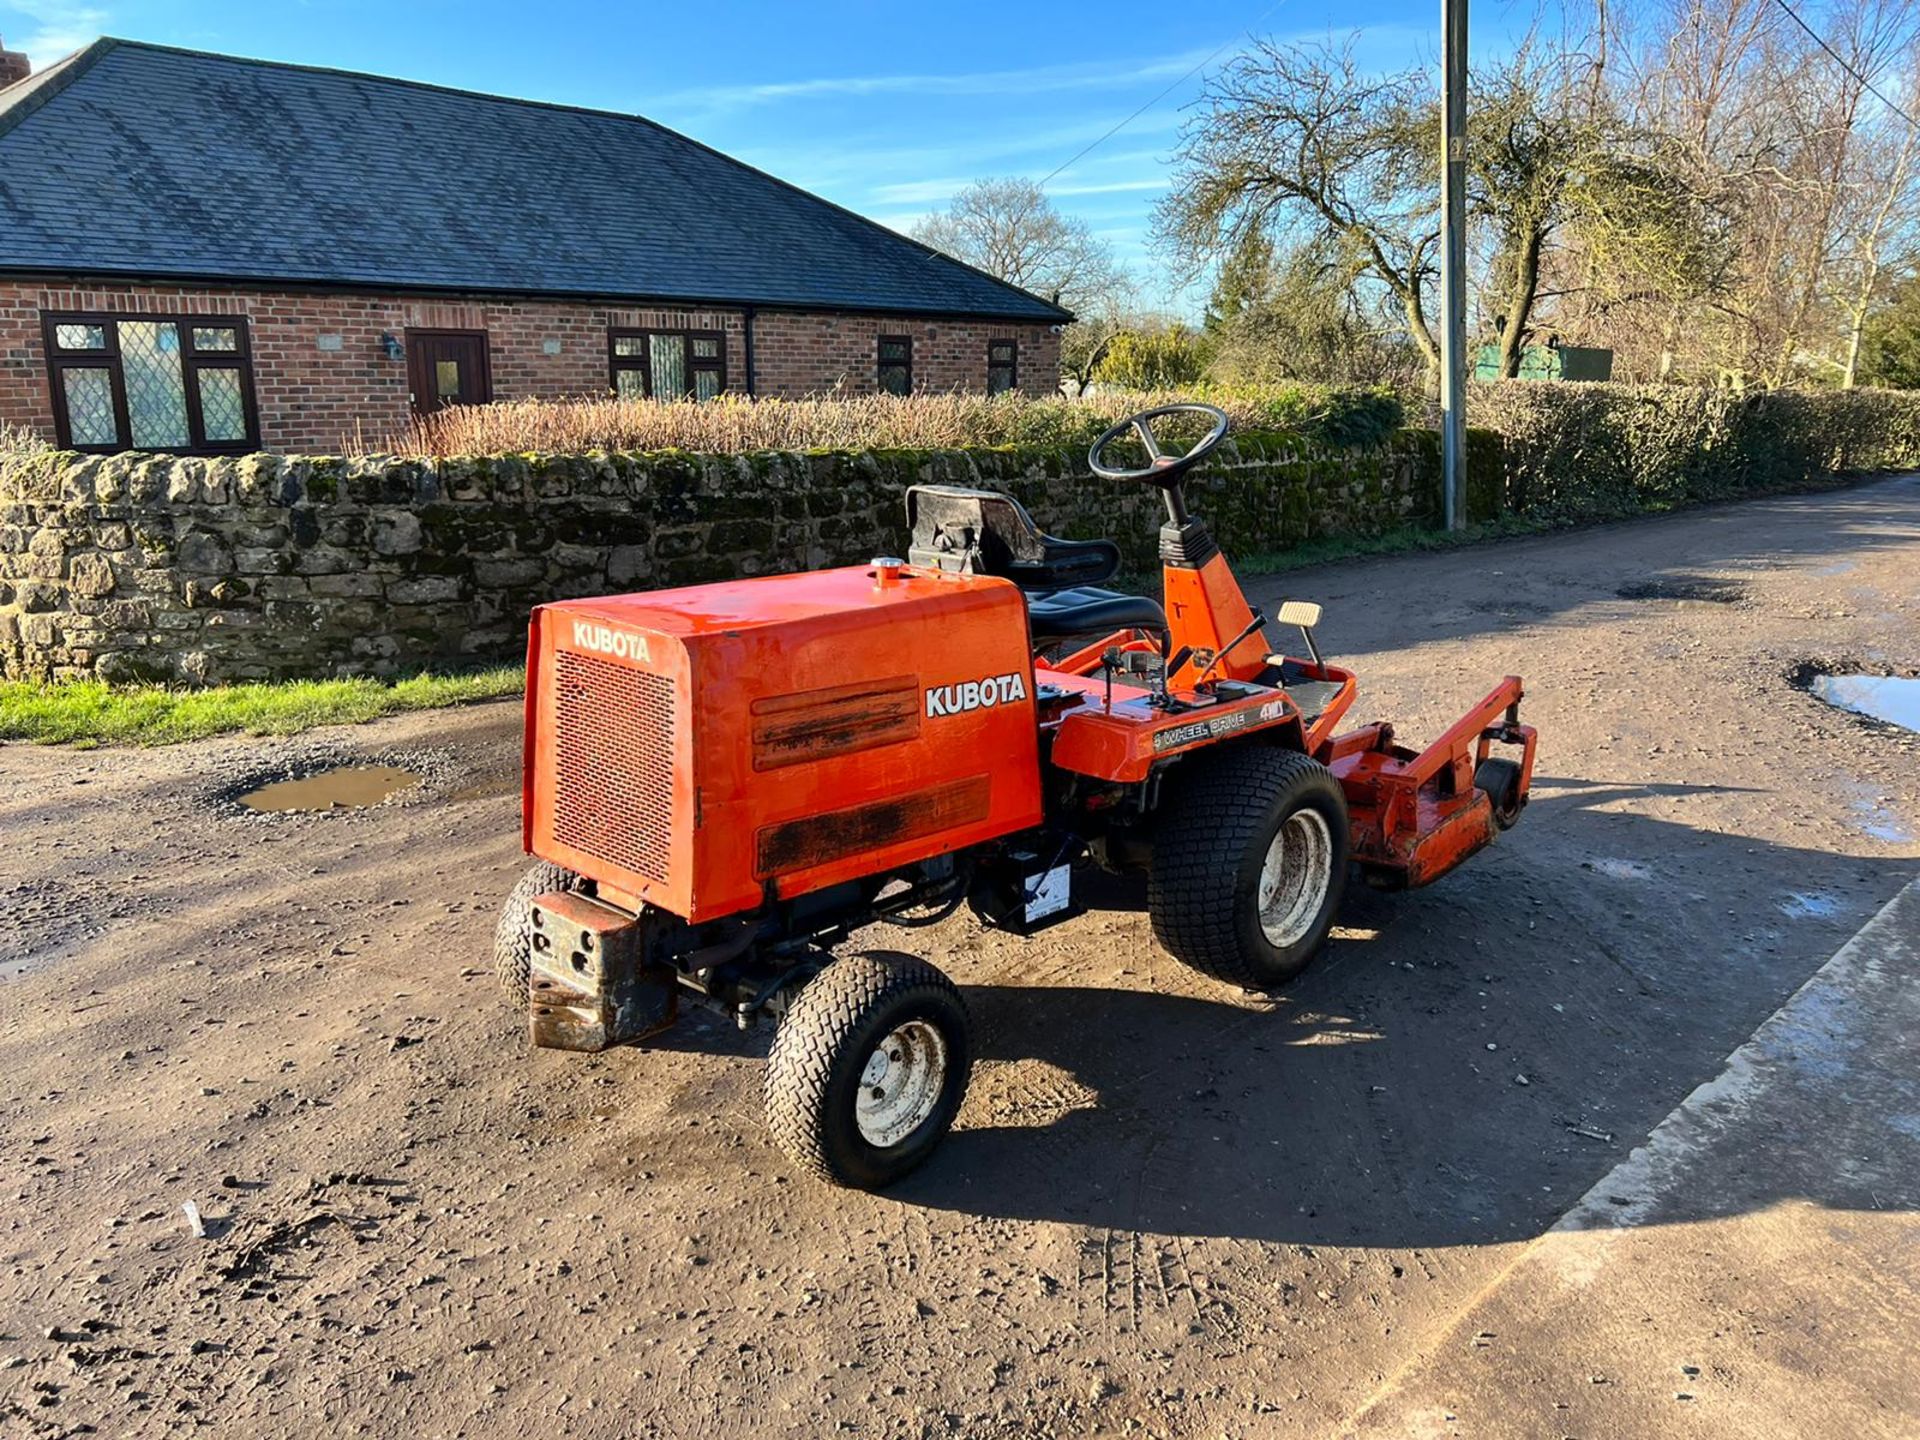 KUBOTA F2400 4WD RIDE ON MOWER, RUNS DRIVES AND CUTS, GOOD SOLID TRIPLE BLADE DECK *PLUS VAT* - Image 4 of 11